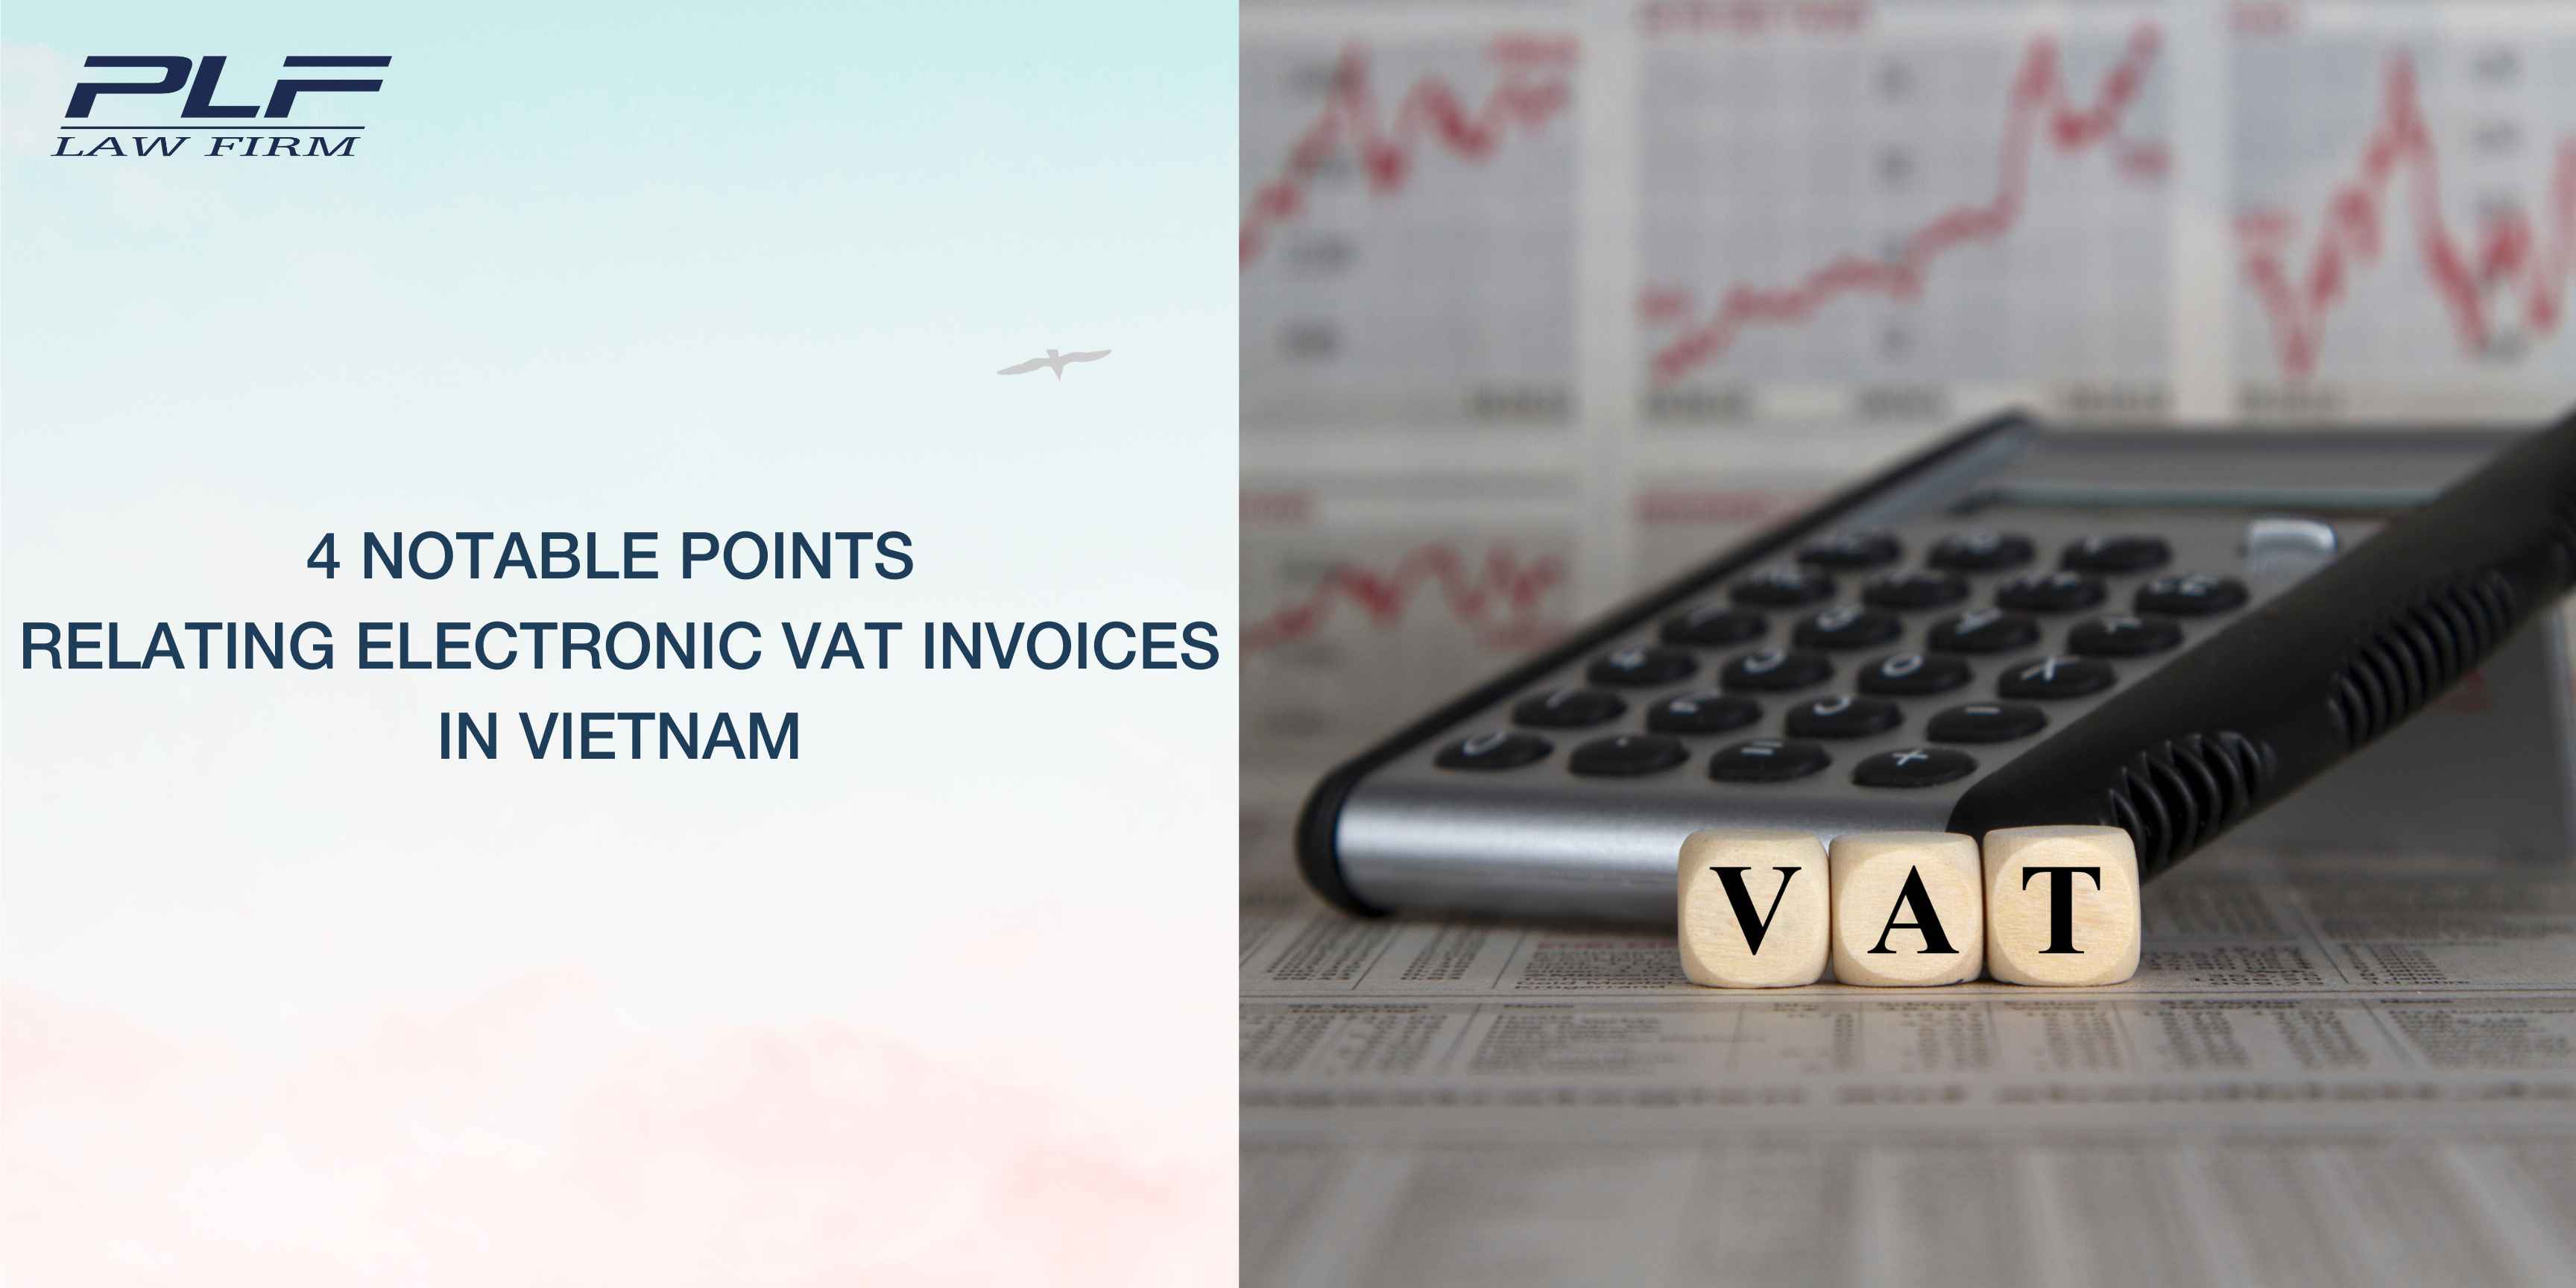 Plf 4 Notable Points Relating Electronic Vat Invoices In Vietnam